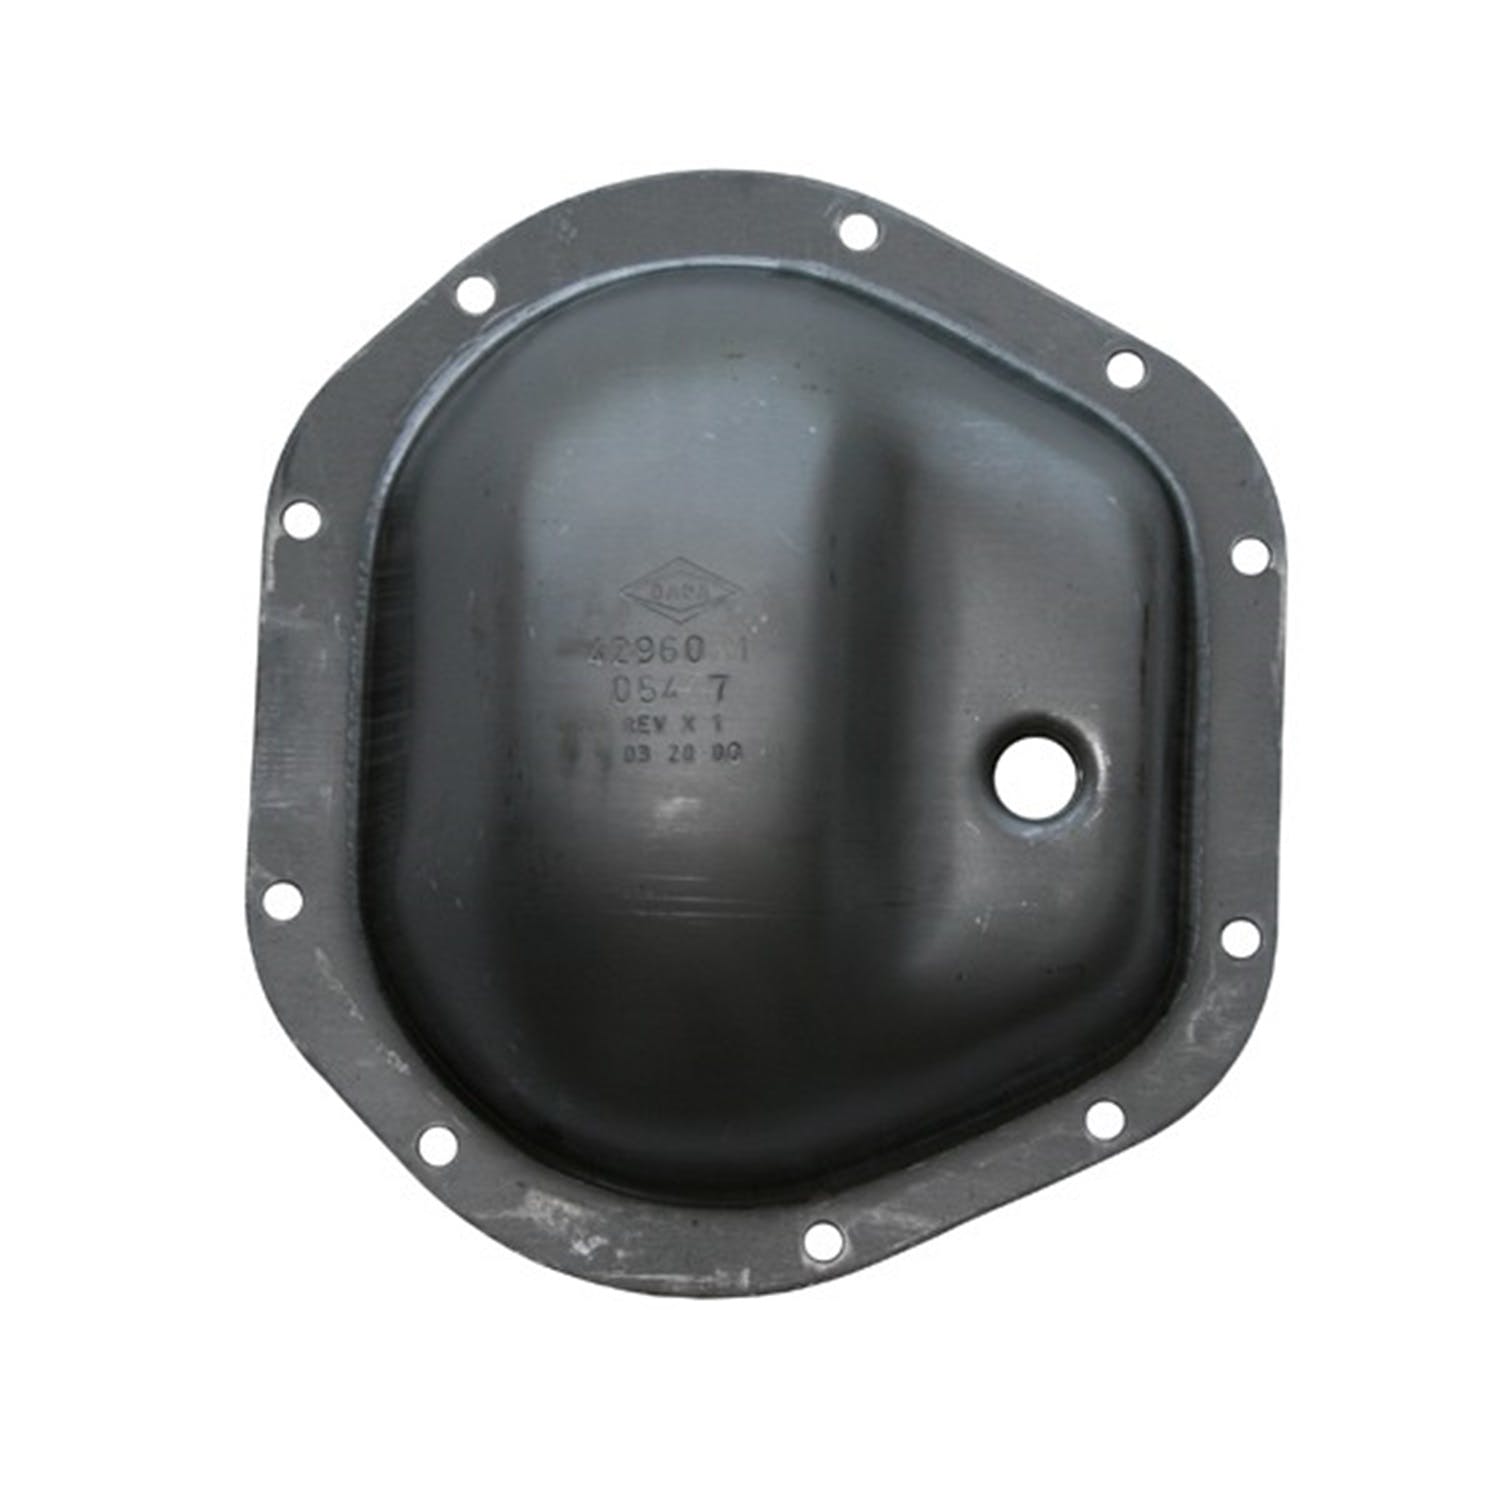 Omix-ADA 16595.85 Rear Differential Cover